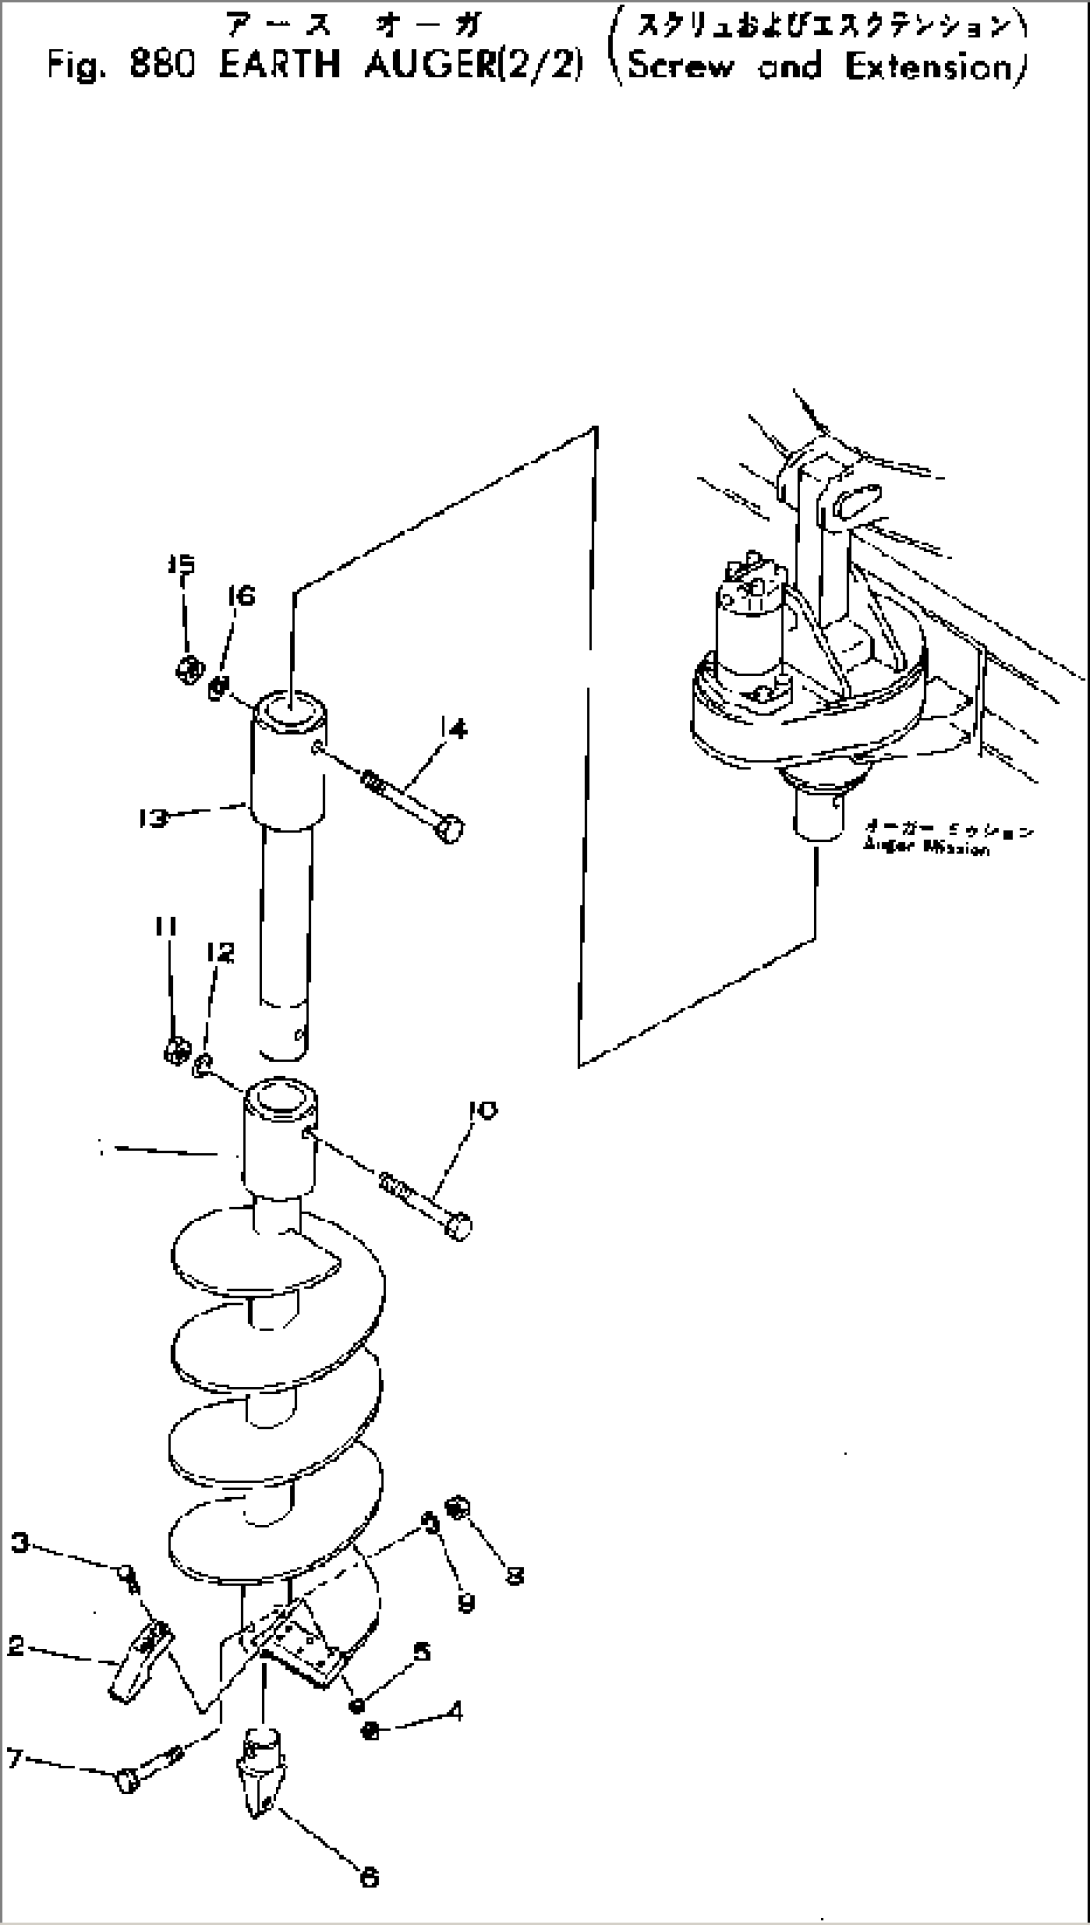 EARTH AUGER (2/2) (SCREW AND EXTENSION)